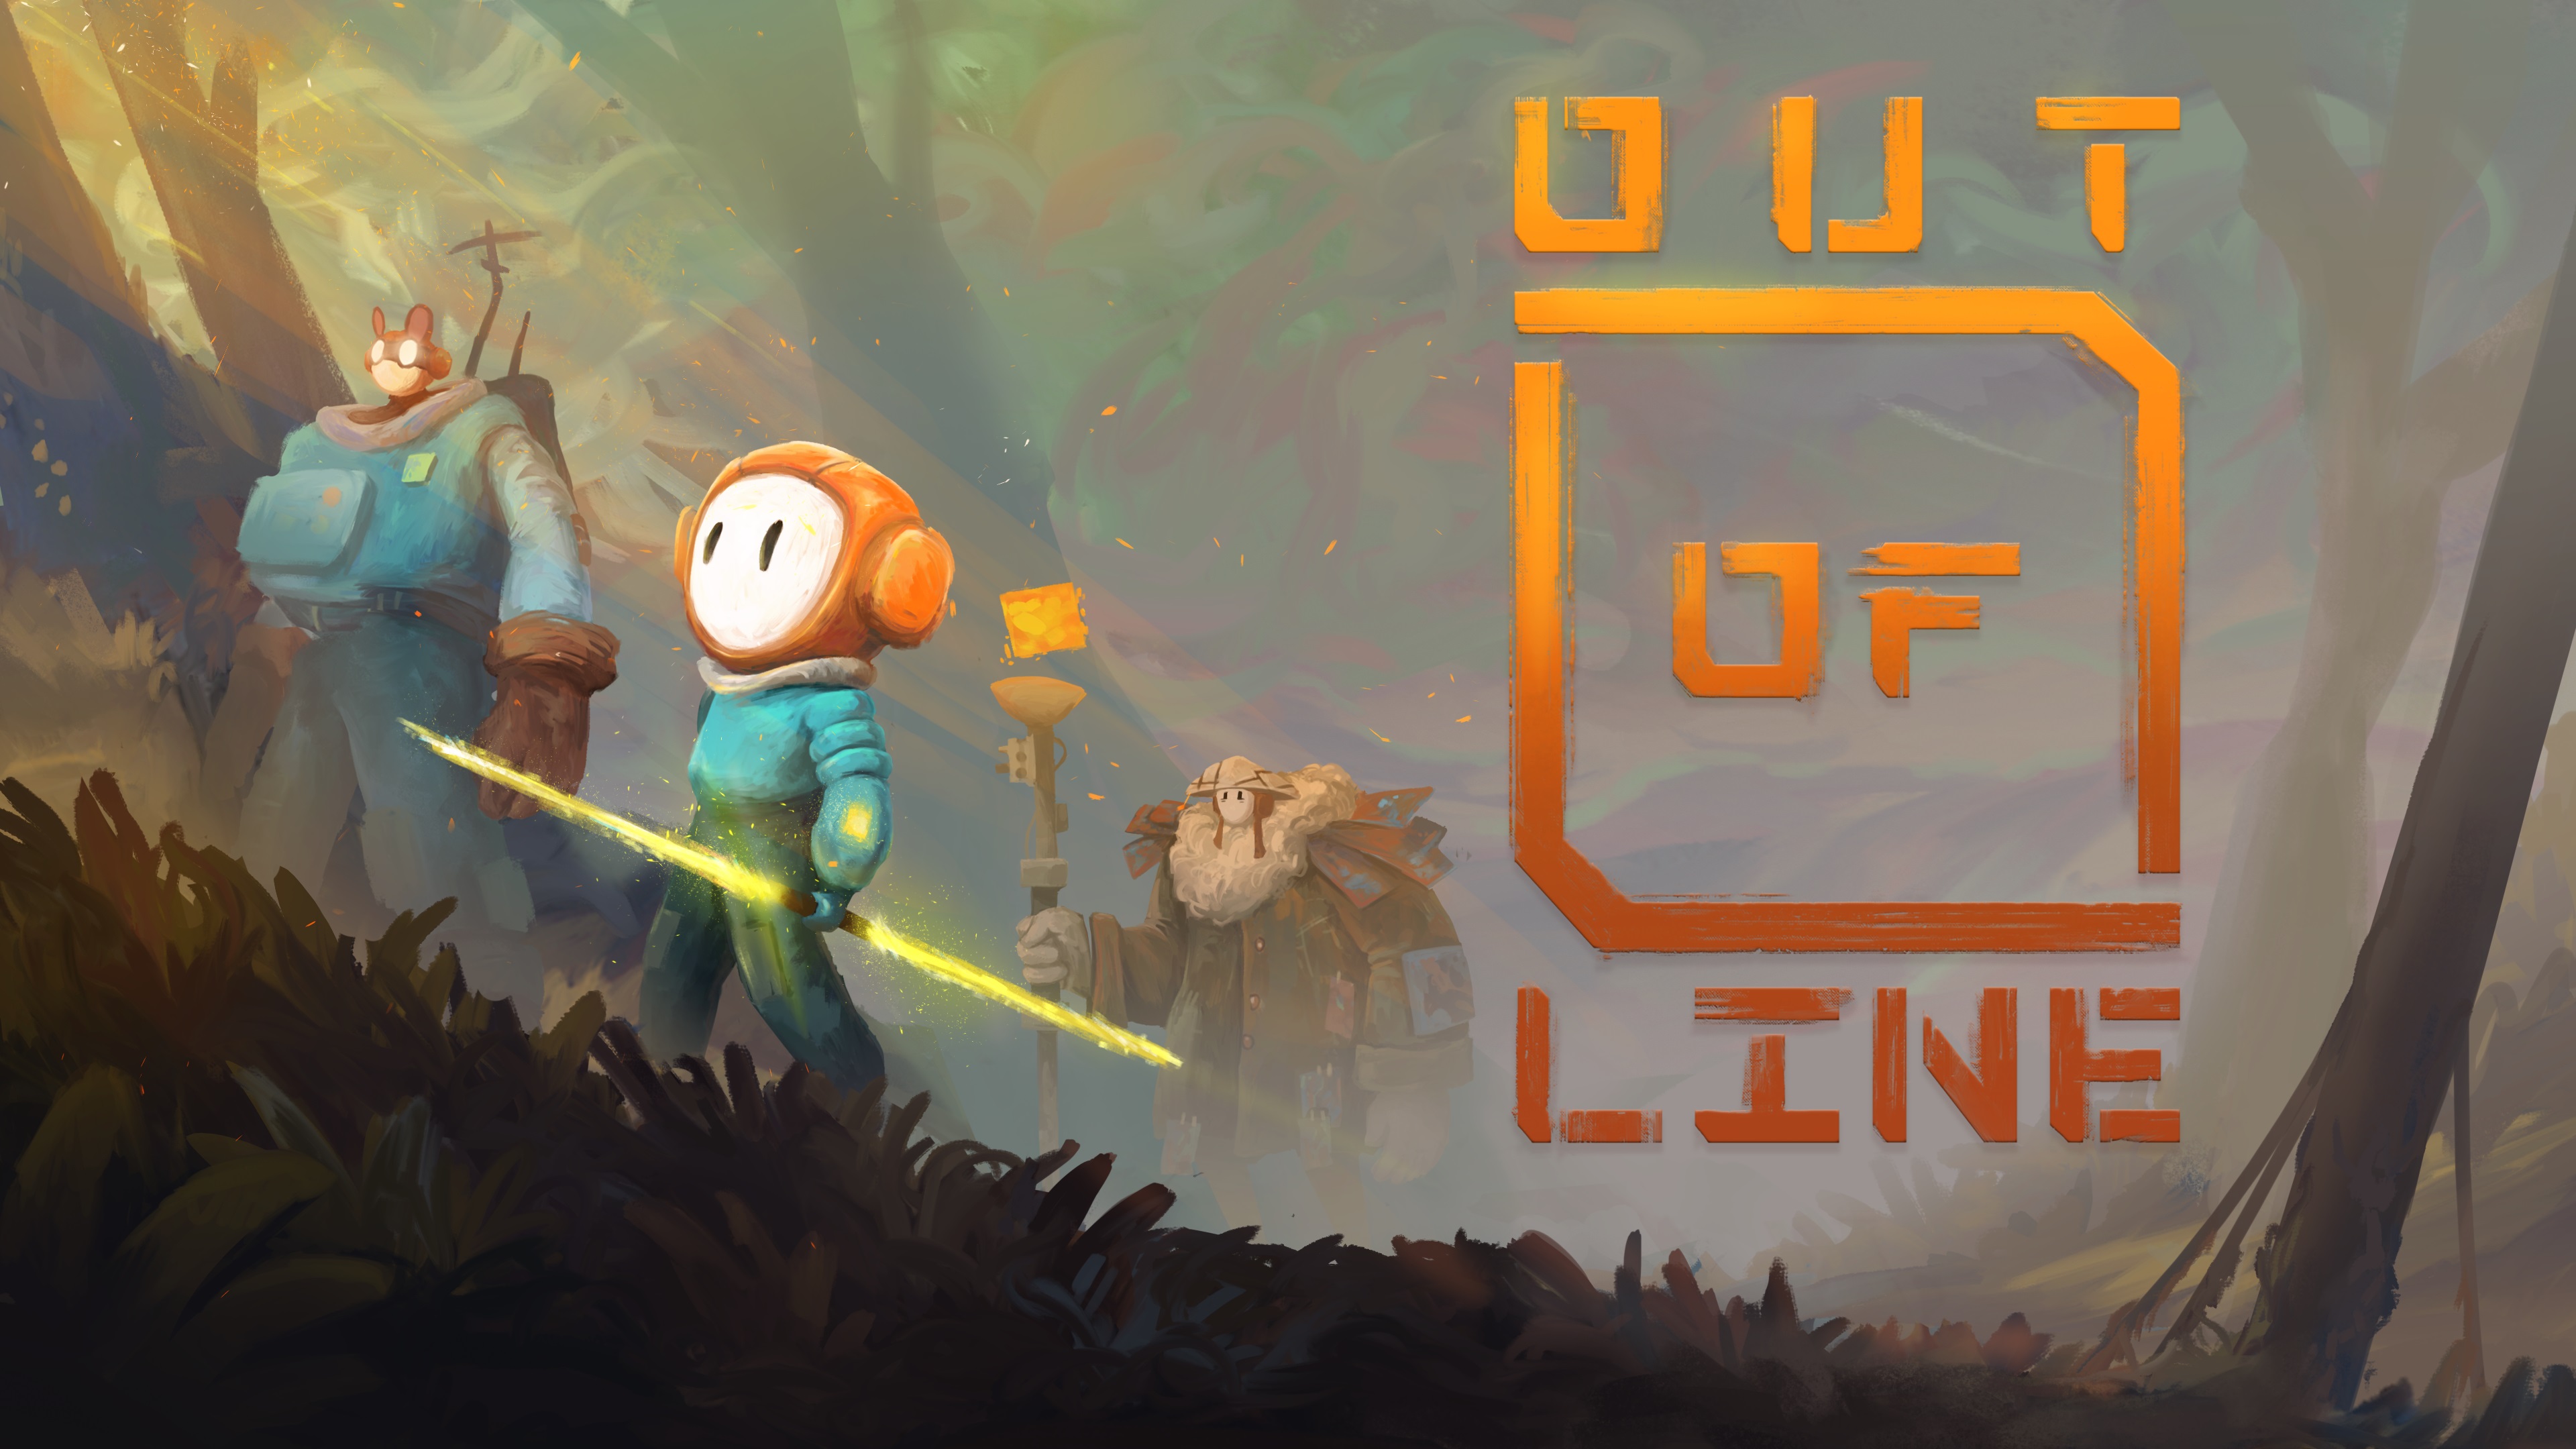 Video Game Out of Line 4k Ultra HD Wallpaper